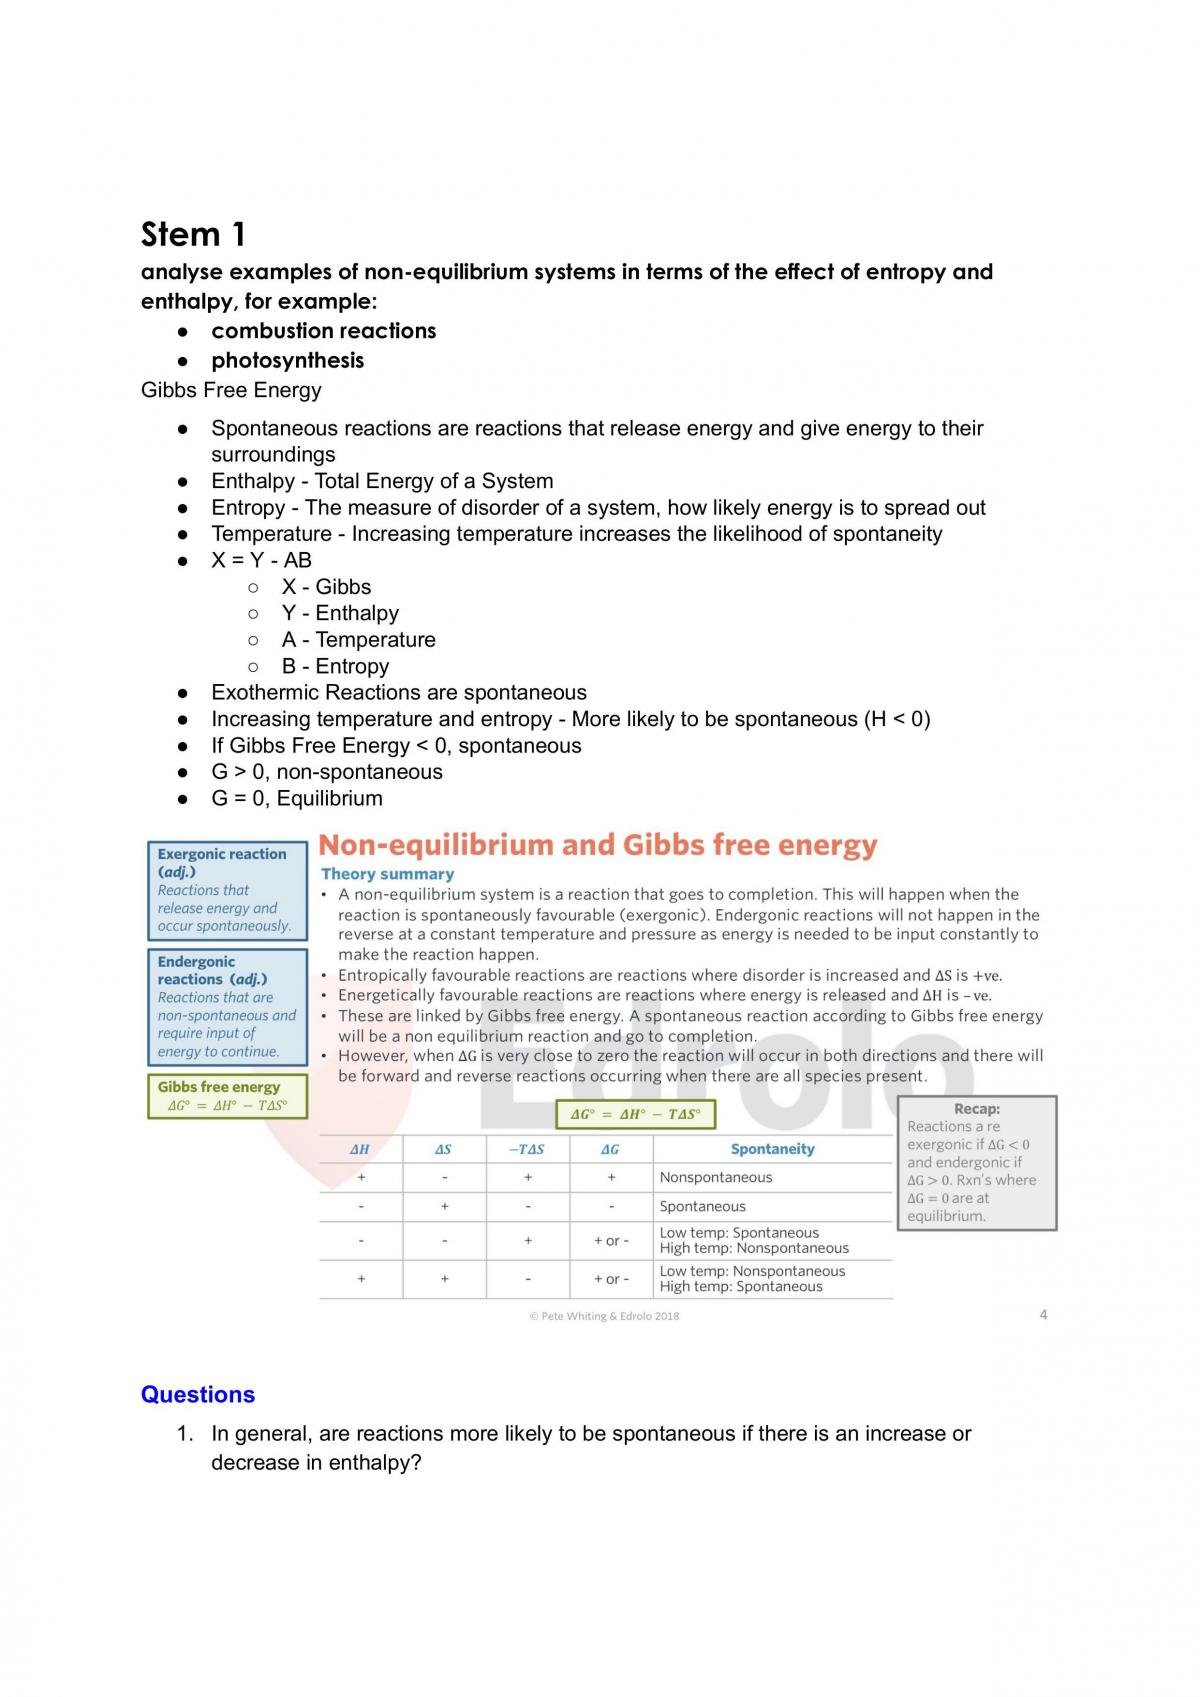 Full chemistry course notes - Page 1